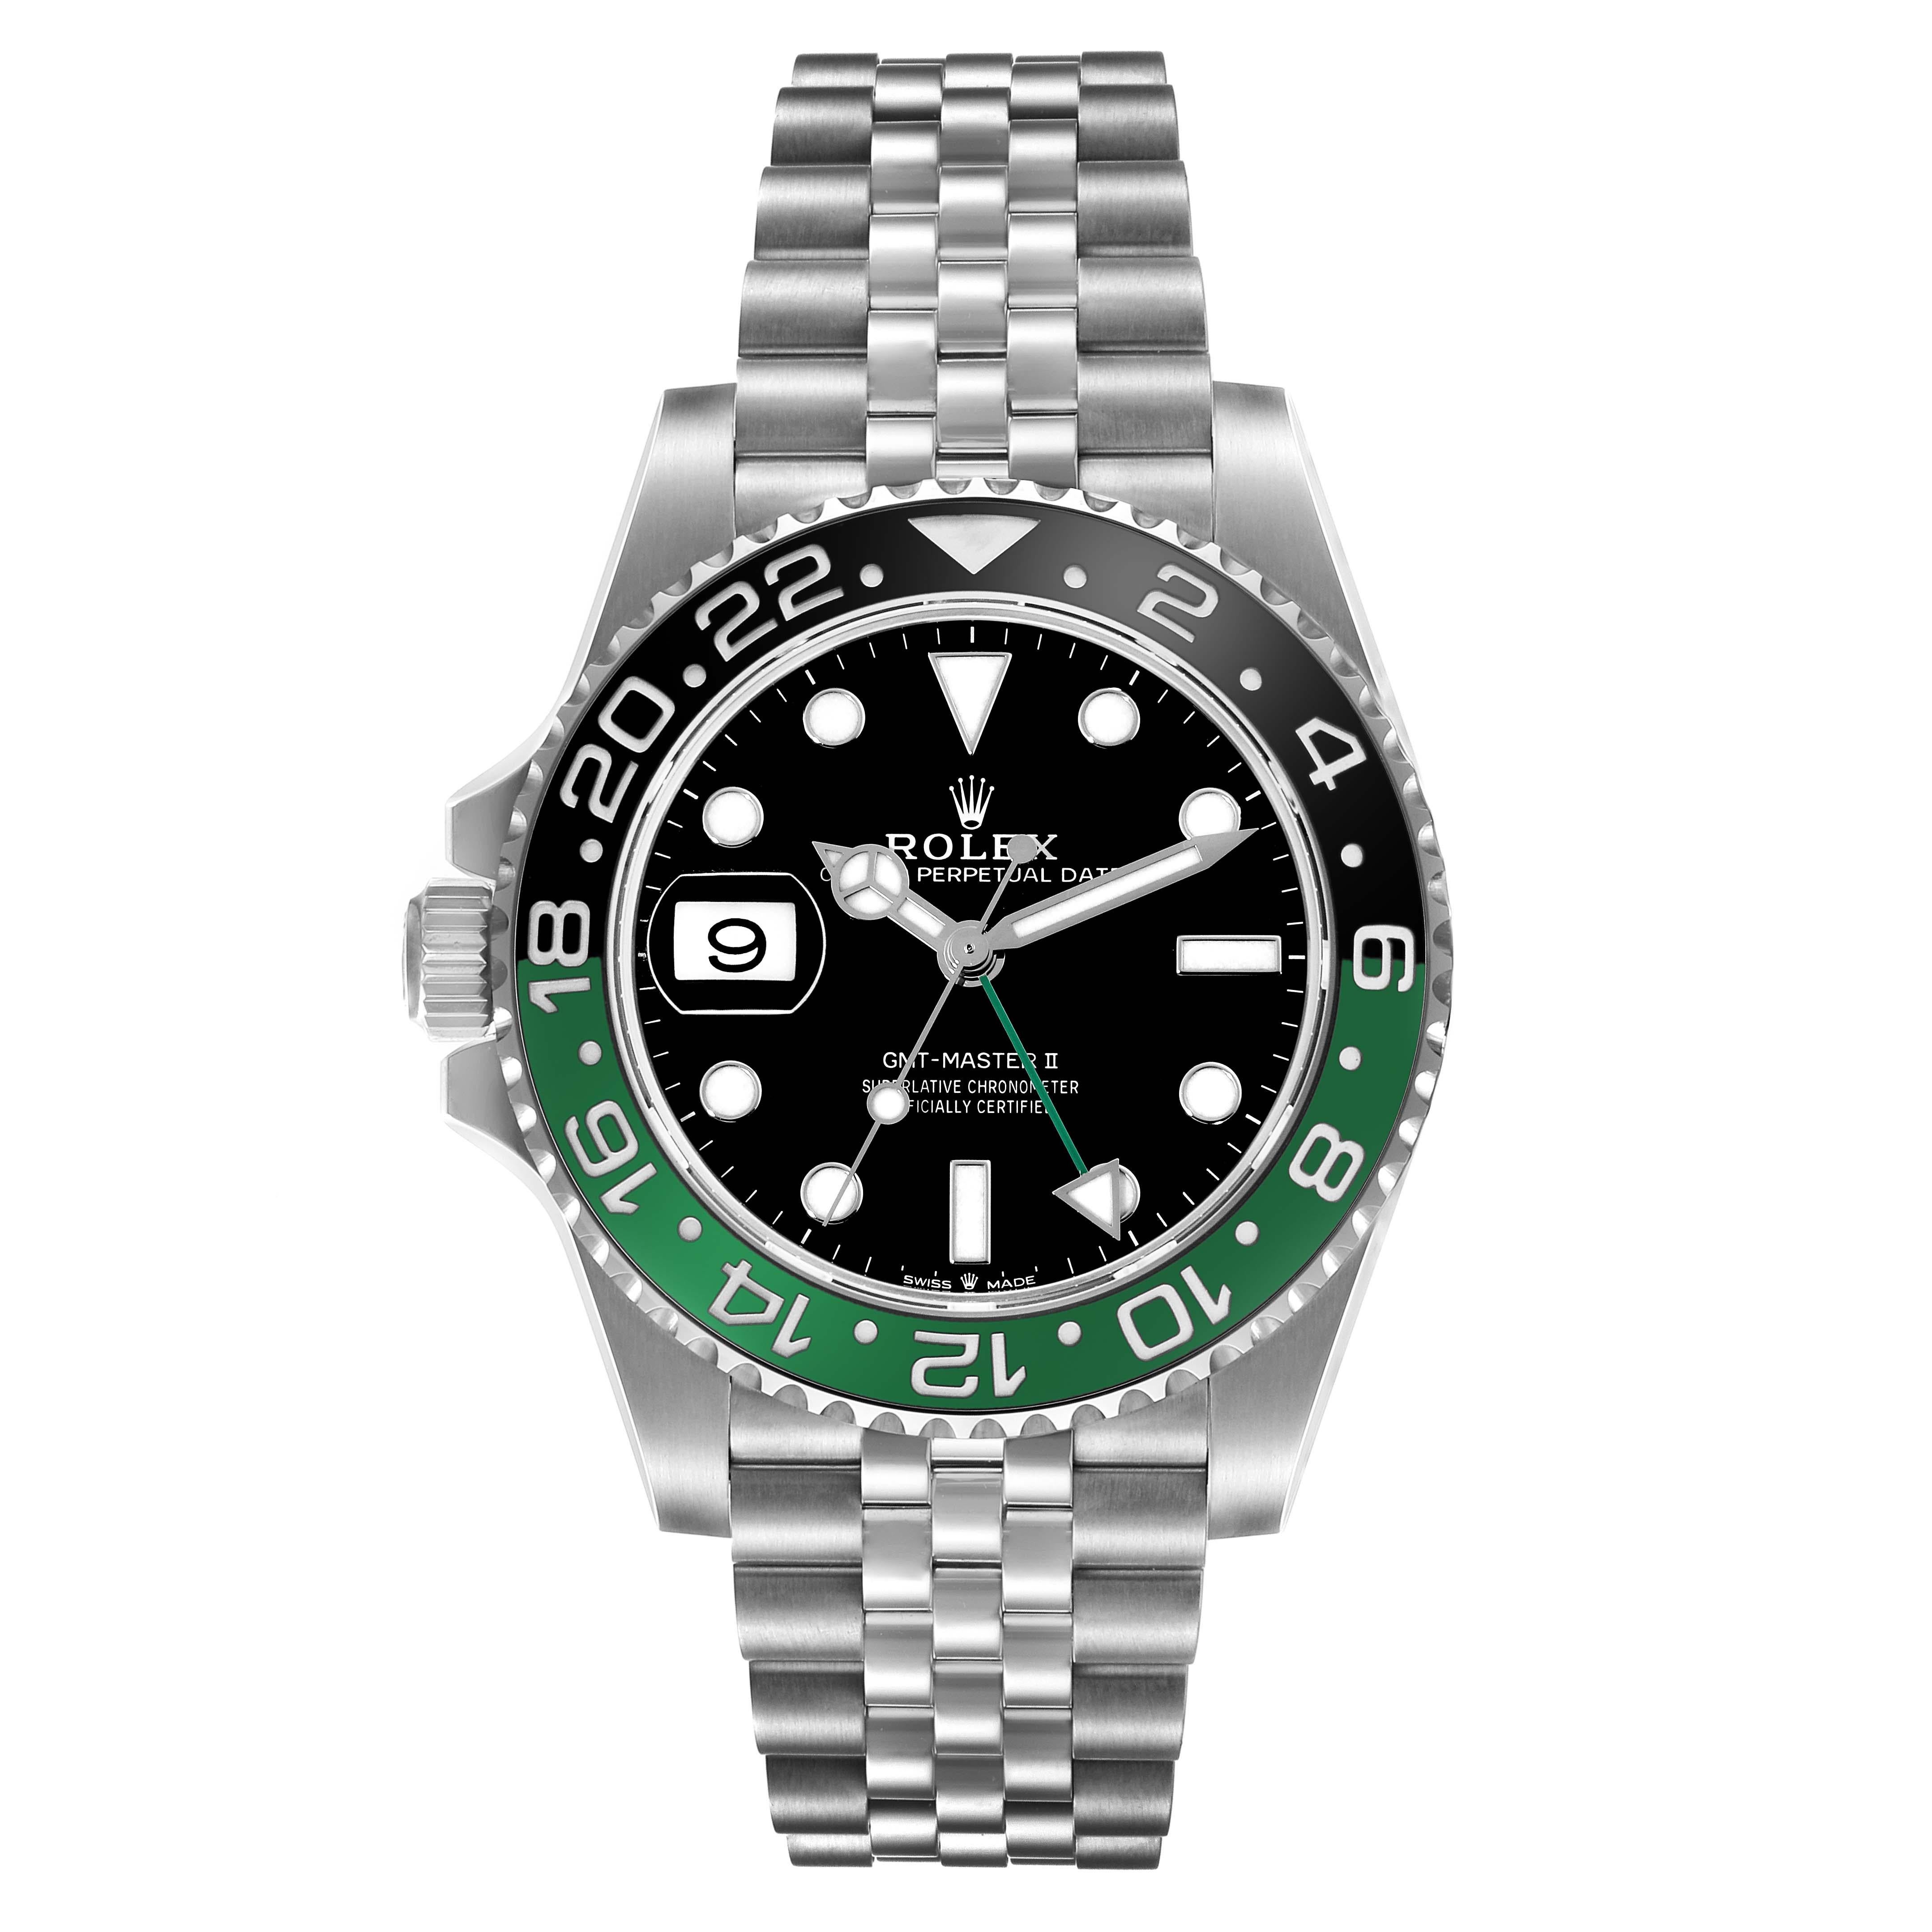 Rolex GMT Master II Sprite Bezel Steel Mens Watch 126720 Box Card. Officially certified chronometer automatic self-winding movement. Stainless steel case 40 mm in diameter. Rolex logo on a crown. Stainless steel bidirectional rotating 24-hour